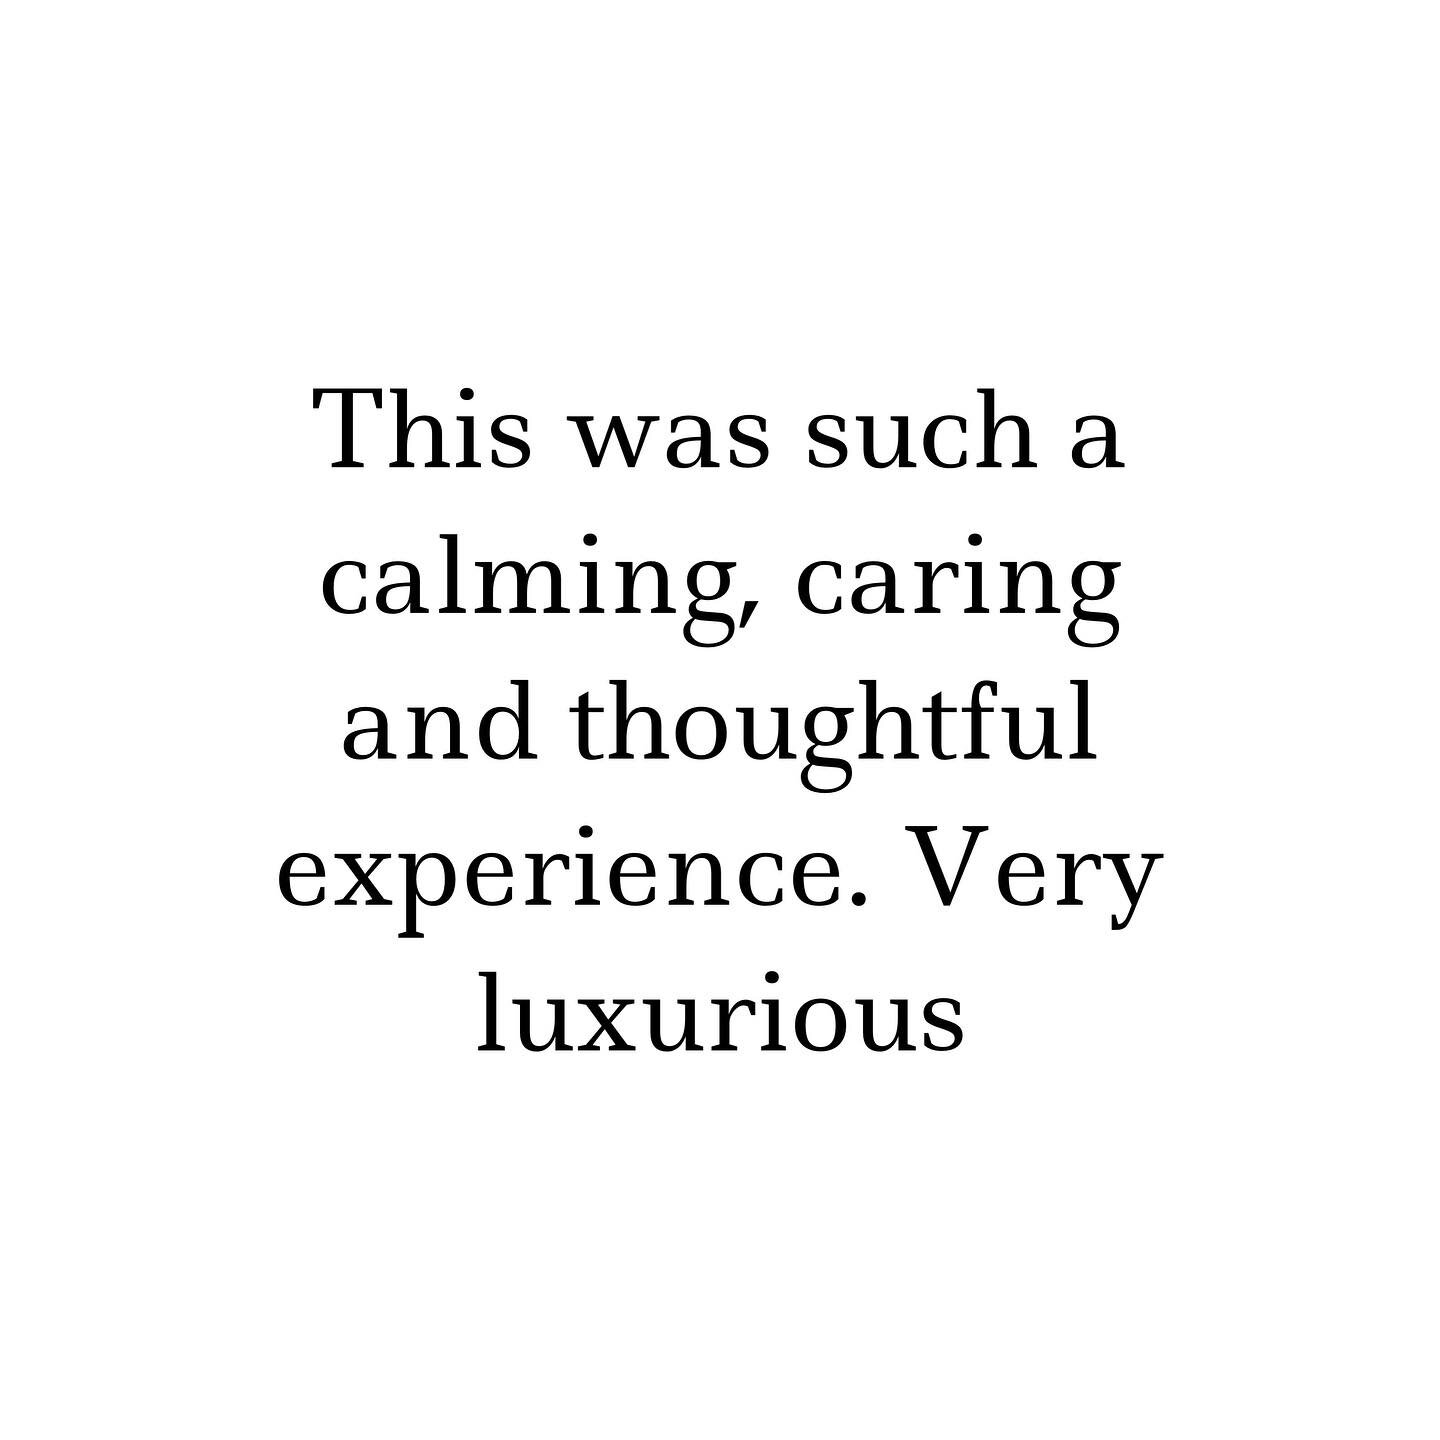 Short but sweet.
Such a perfect little review.

I feel it gets right to the heart of what we try and create at Loop.

Feel grateful our work comes through and that we&rsquo;ve found a community that &lsquo;gets it&rsquo;.

Loop Massage / Wapping Warf